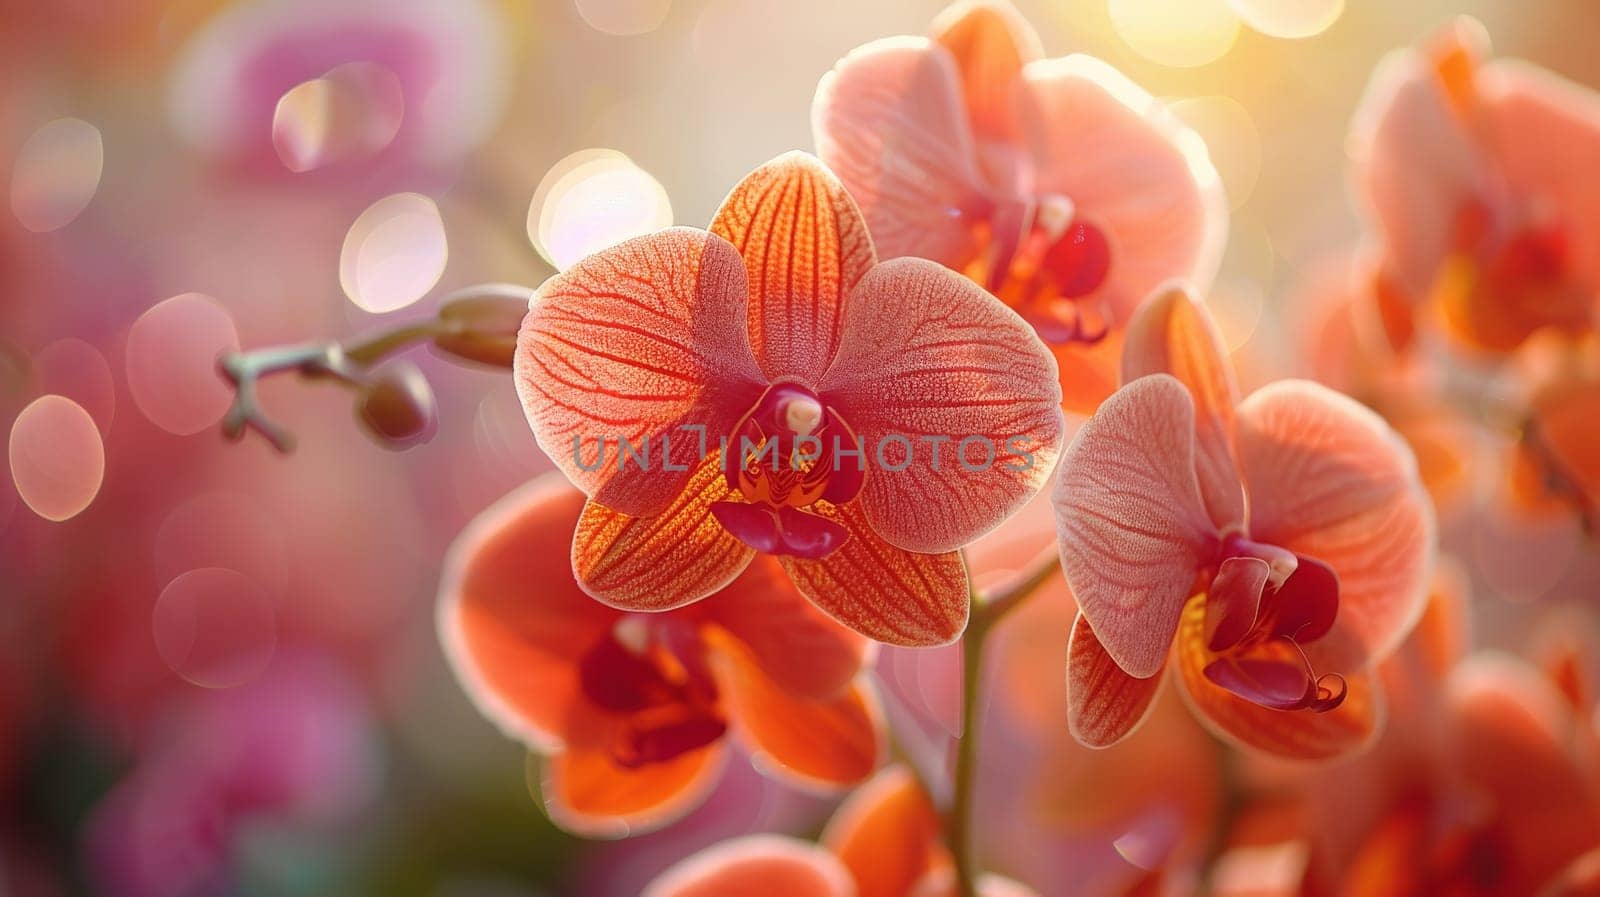 A bunch of orange flowers with a blurry background. The flowers are in full bloom and are the main focus of the image